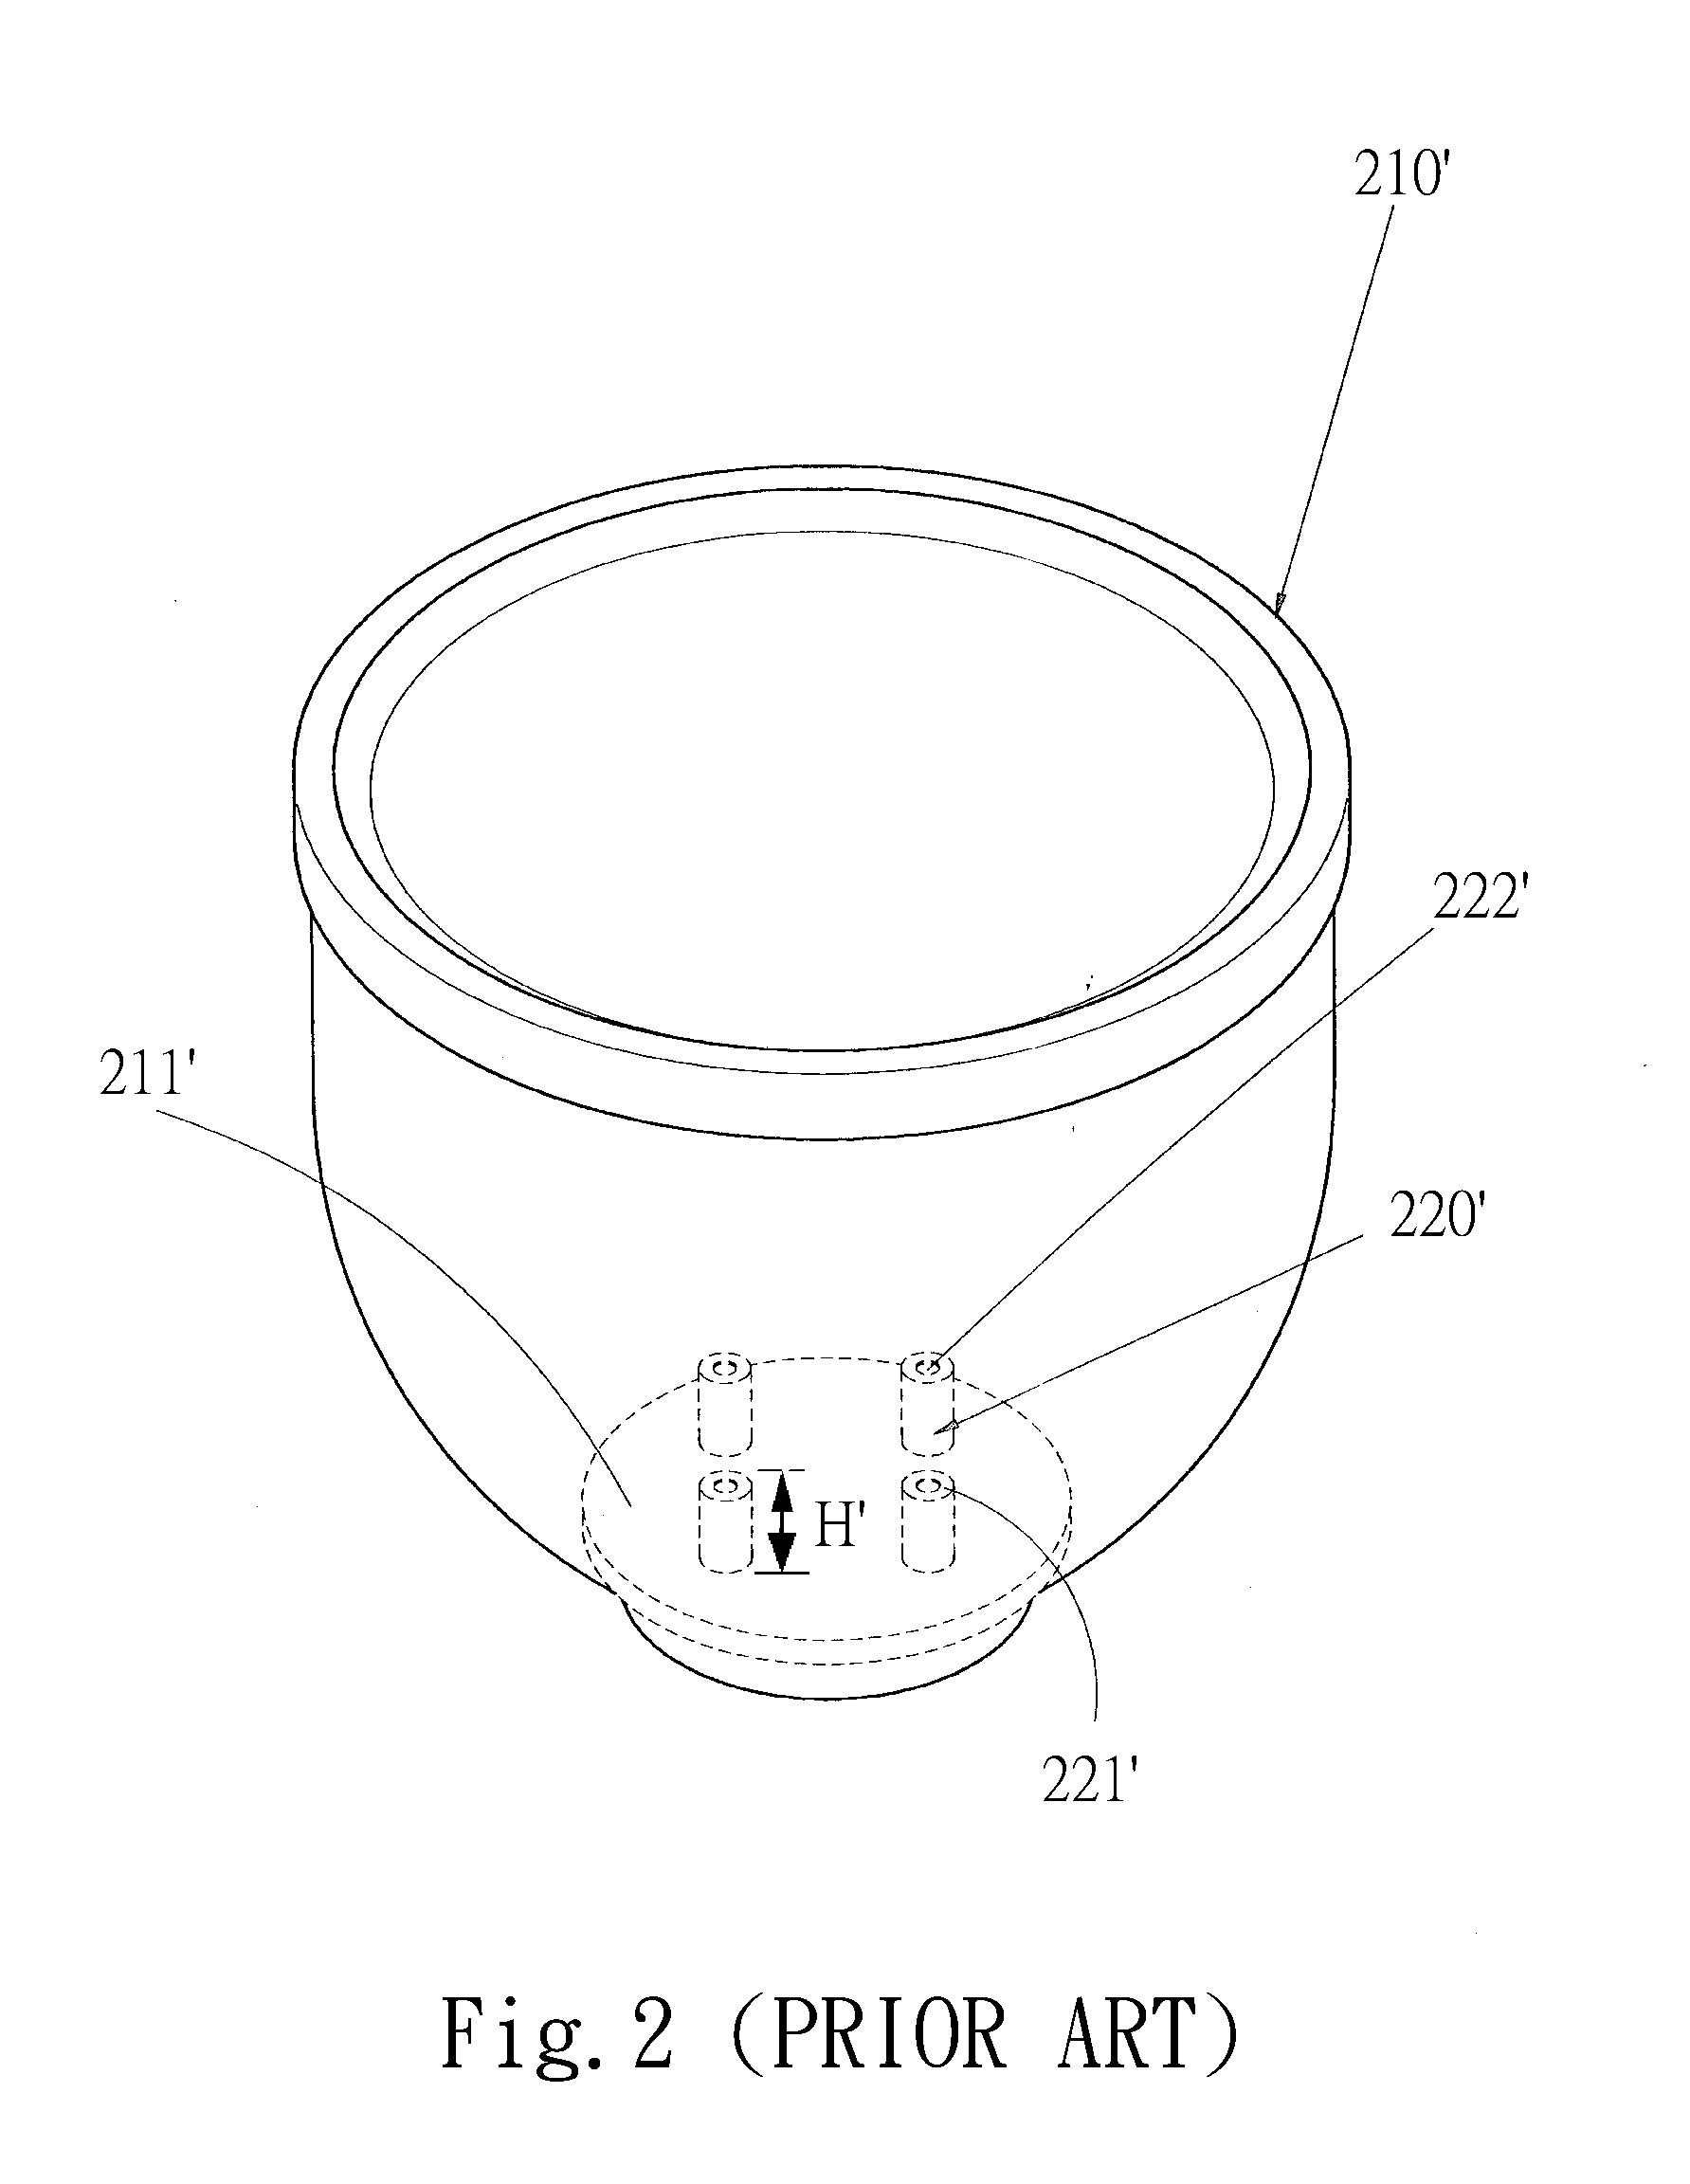 Plant pot with elevated ventilation hole